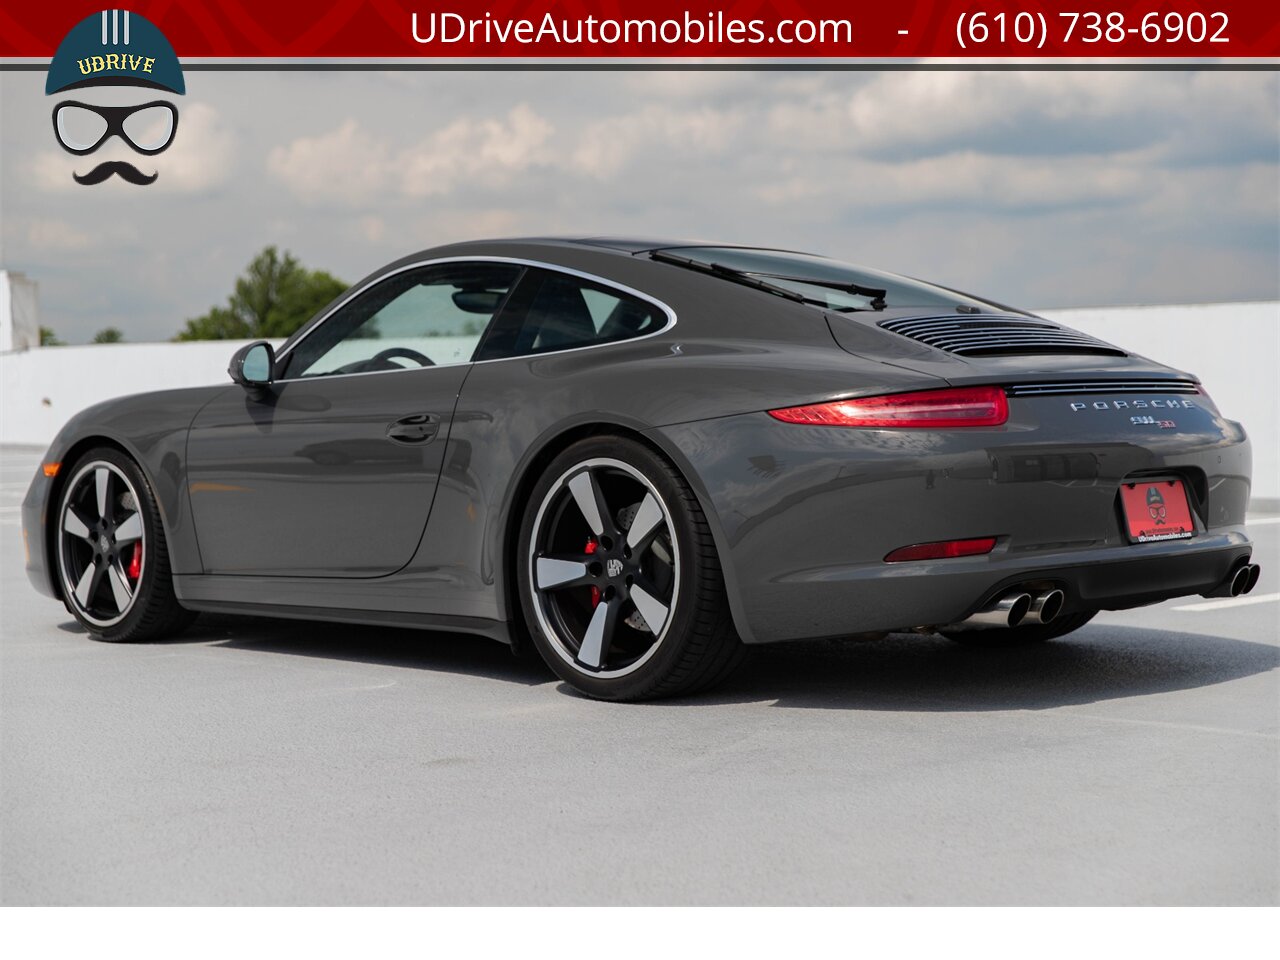 2014 Porsche 911 Carrera S 50th Anniversary Edition Certified  CPO Warranty thru 12/26/21 Full Front End Clear Film - Photo 20 - West Chester, PA 19382